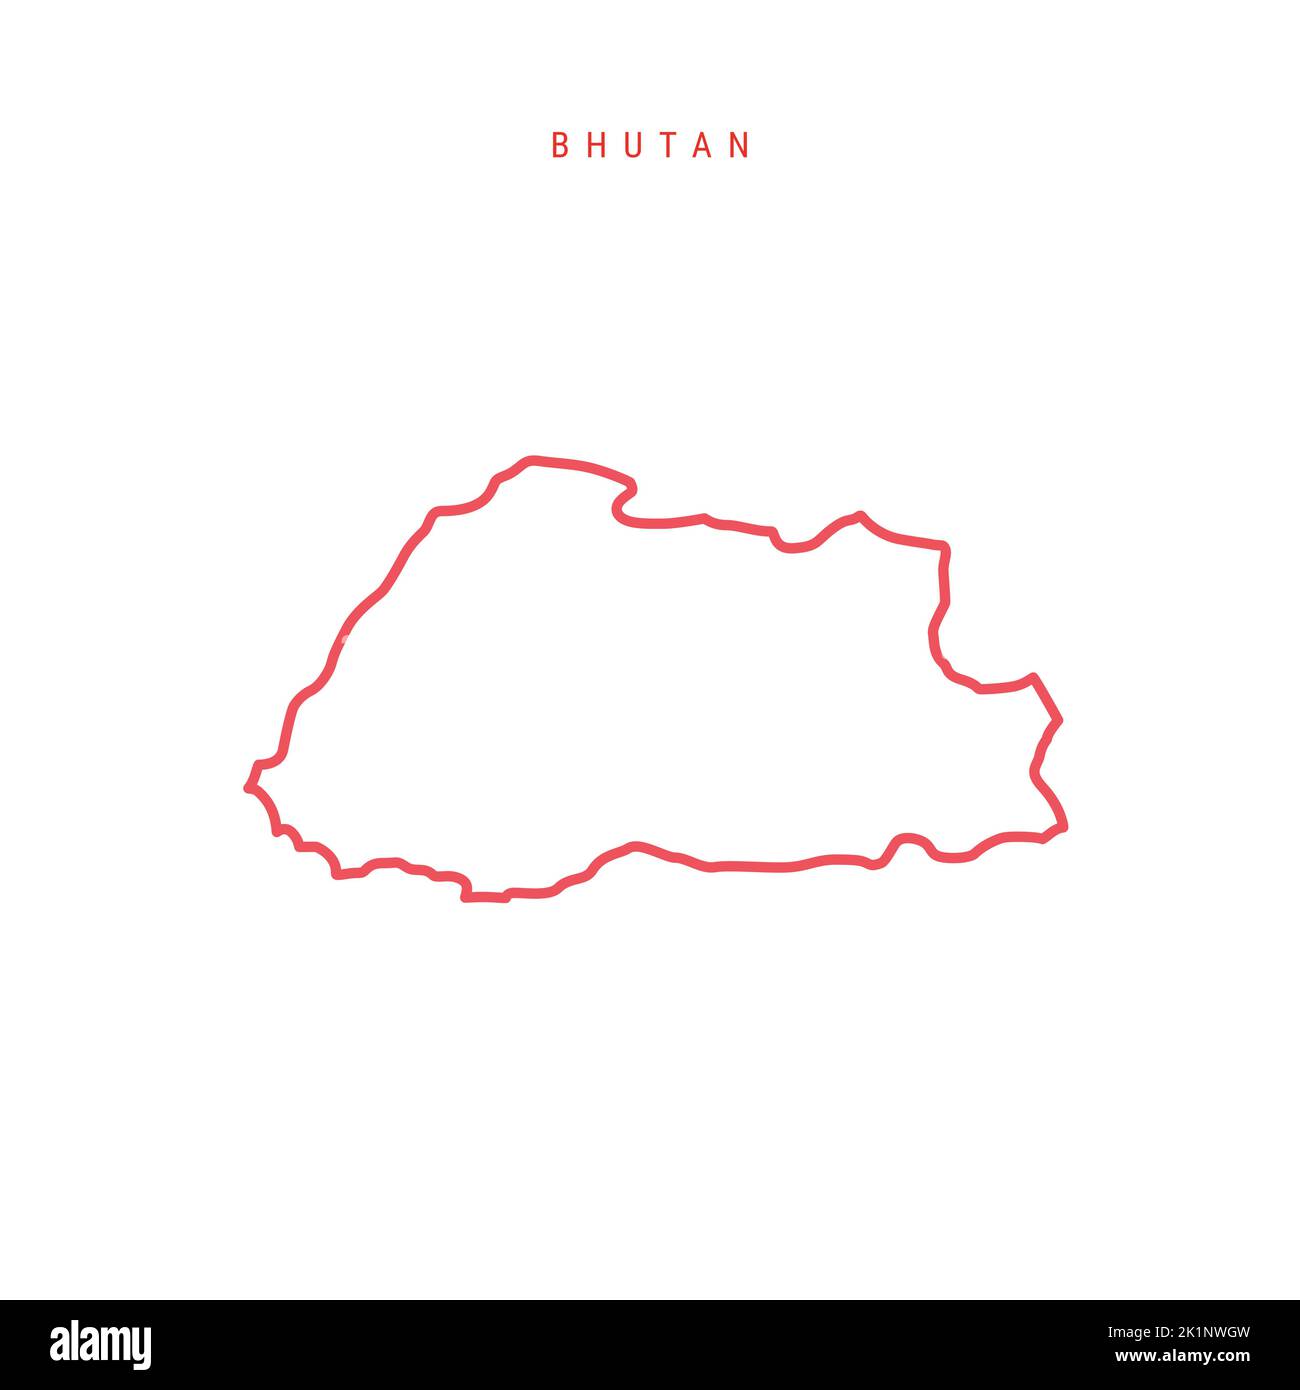 Bhutan editable outline map. Bhutanese red border. Country name. Adjust line weight. Change to any color. Vector illustration. Stock Vector